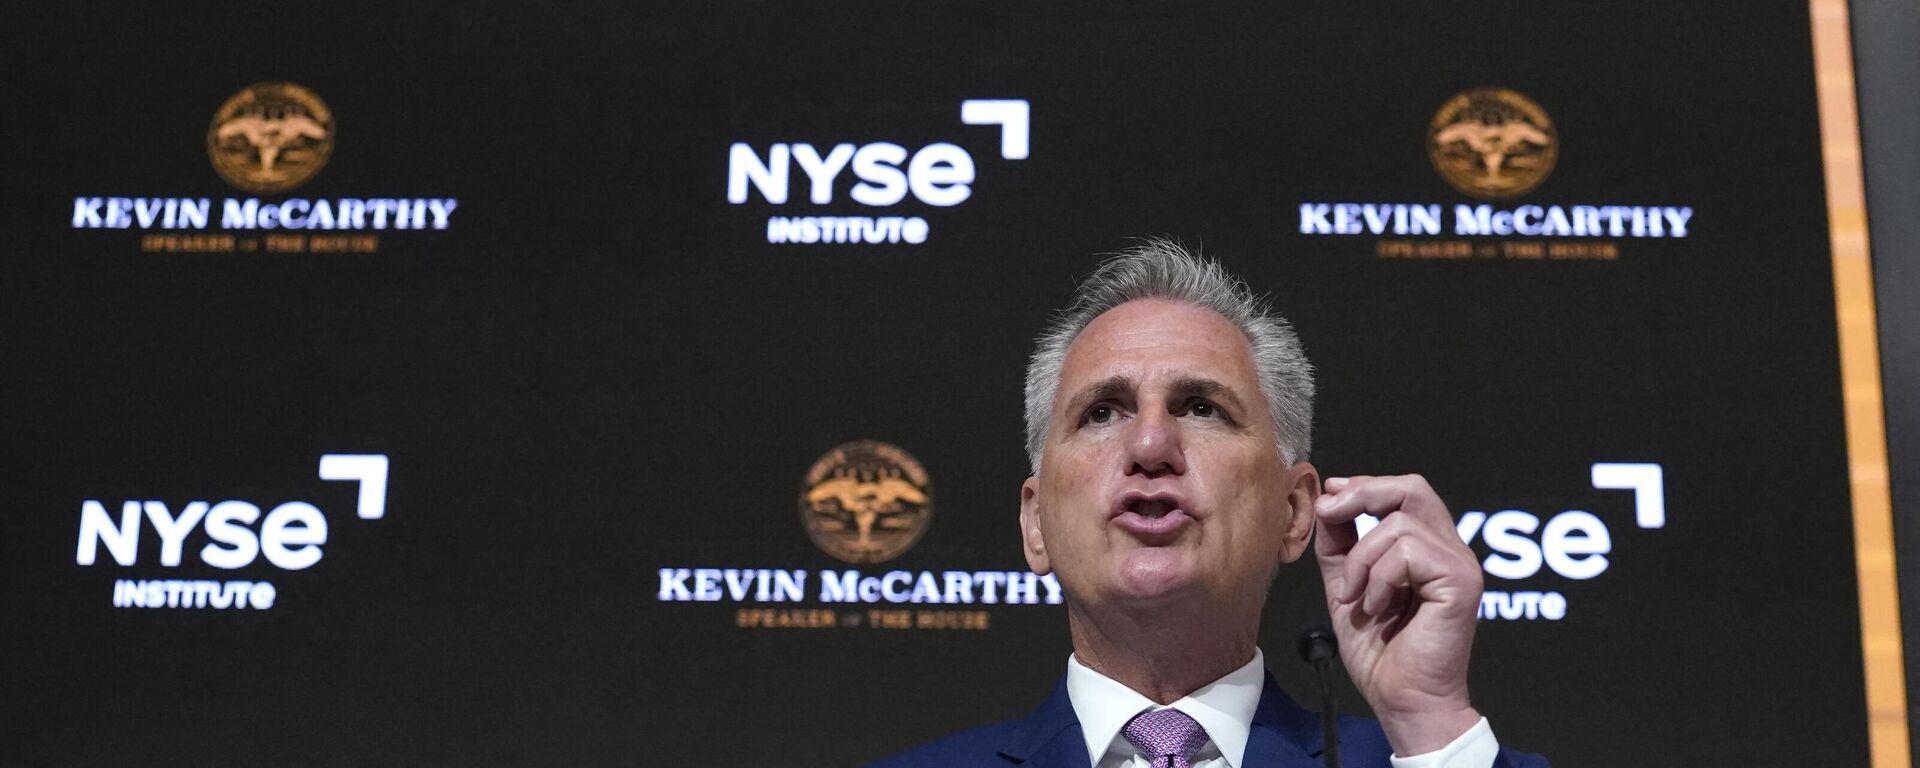 US House Speaker Kevin McCarthy delivers a speech on the econony at the New York Stock Exchange (NYSE) in New York on April 17, 2023. - Sputnik International, 1920, 17.04.2023